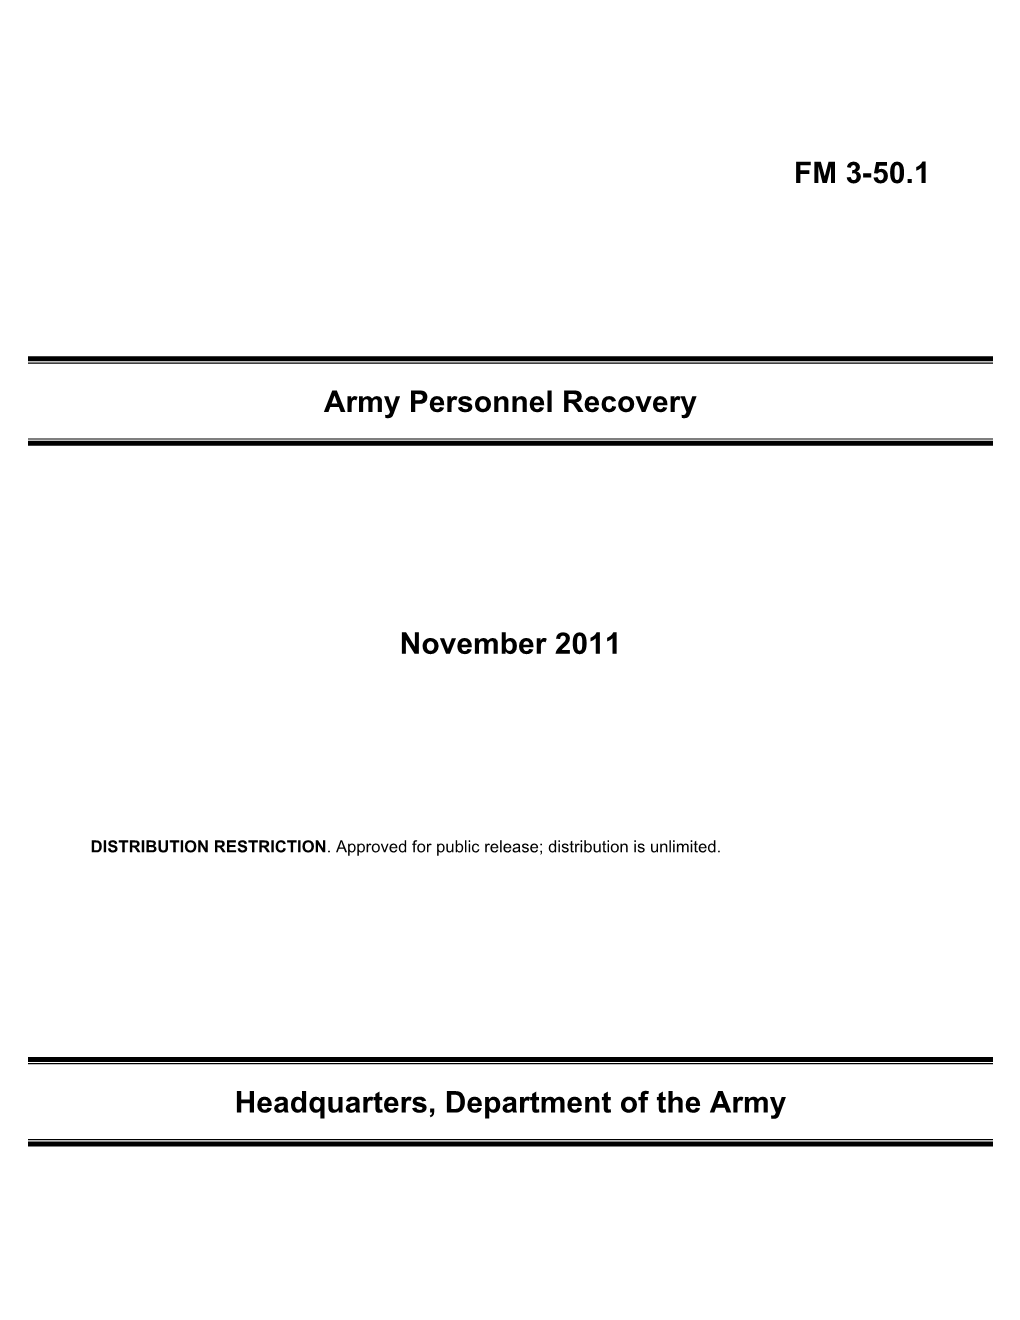 FM 3-50.1 Army Personnel Recovery November 2011